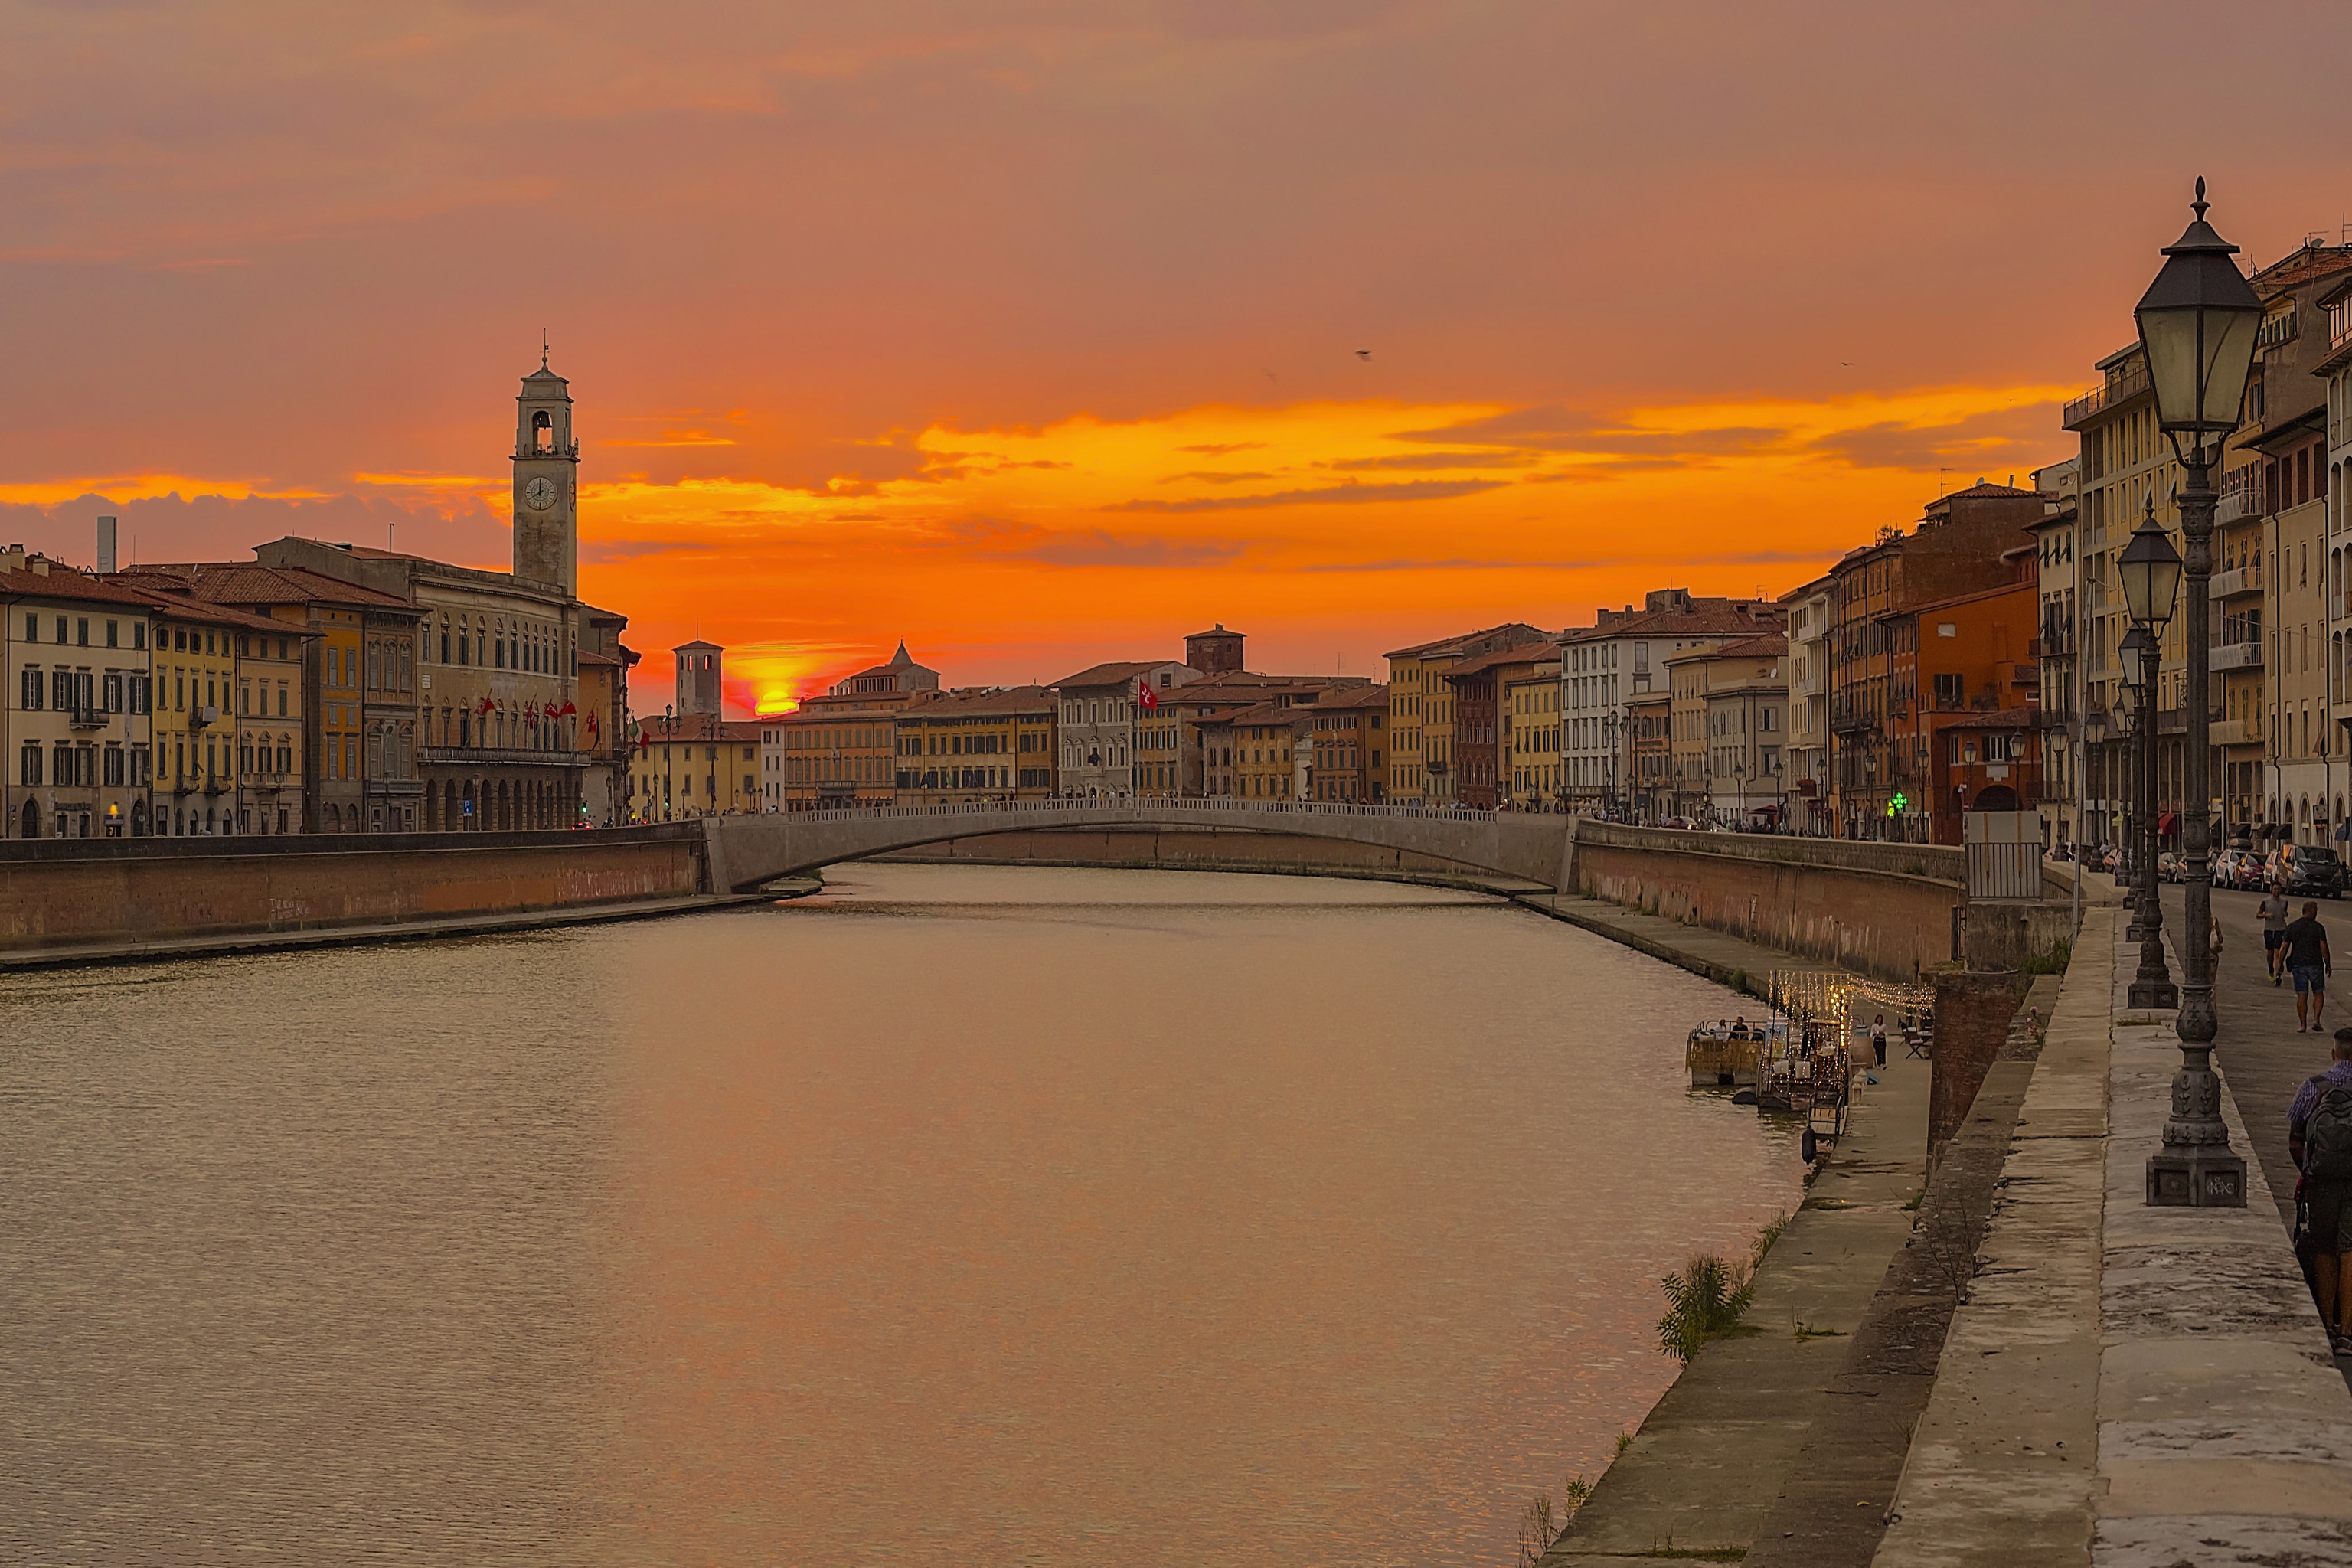 house, man made, pisa, building, italy, river, sunset, cities